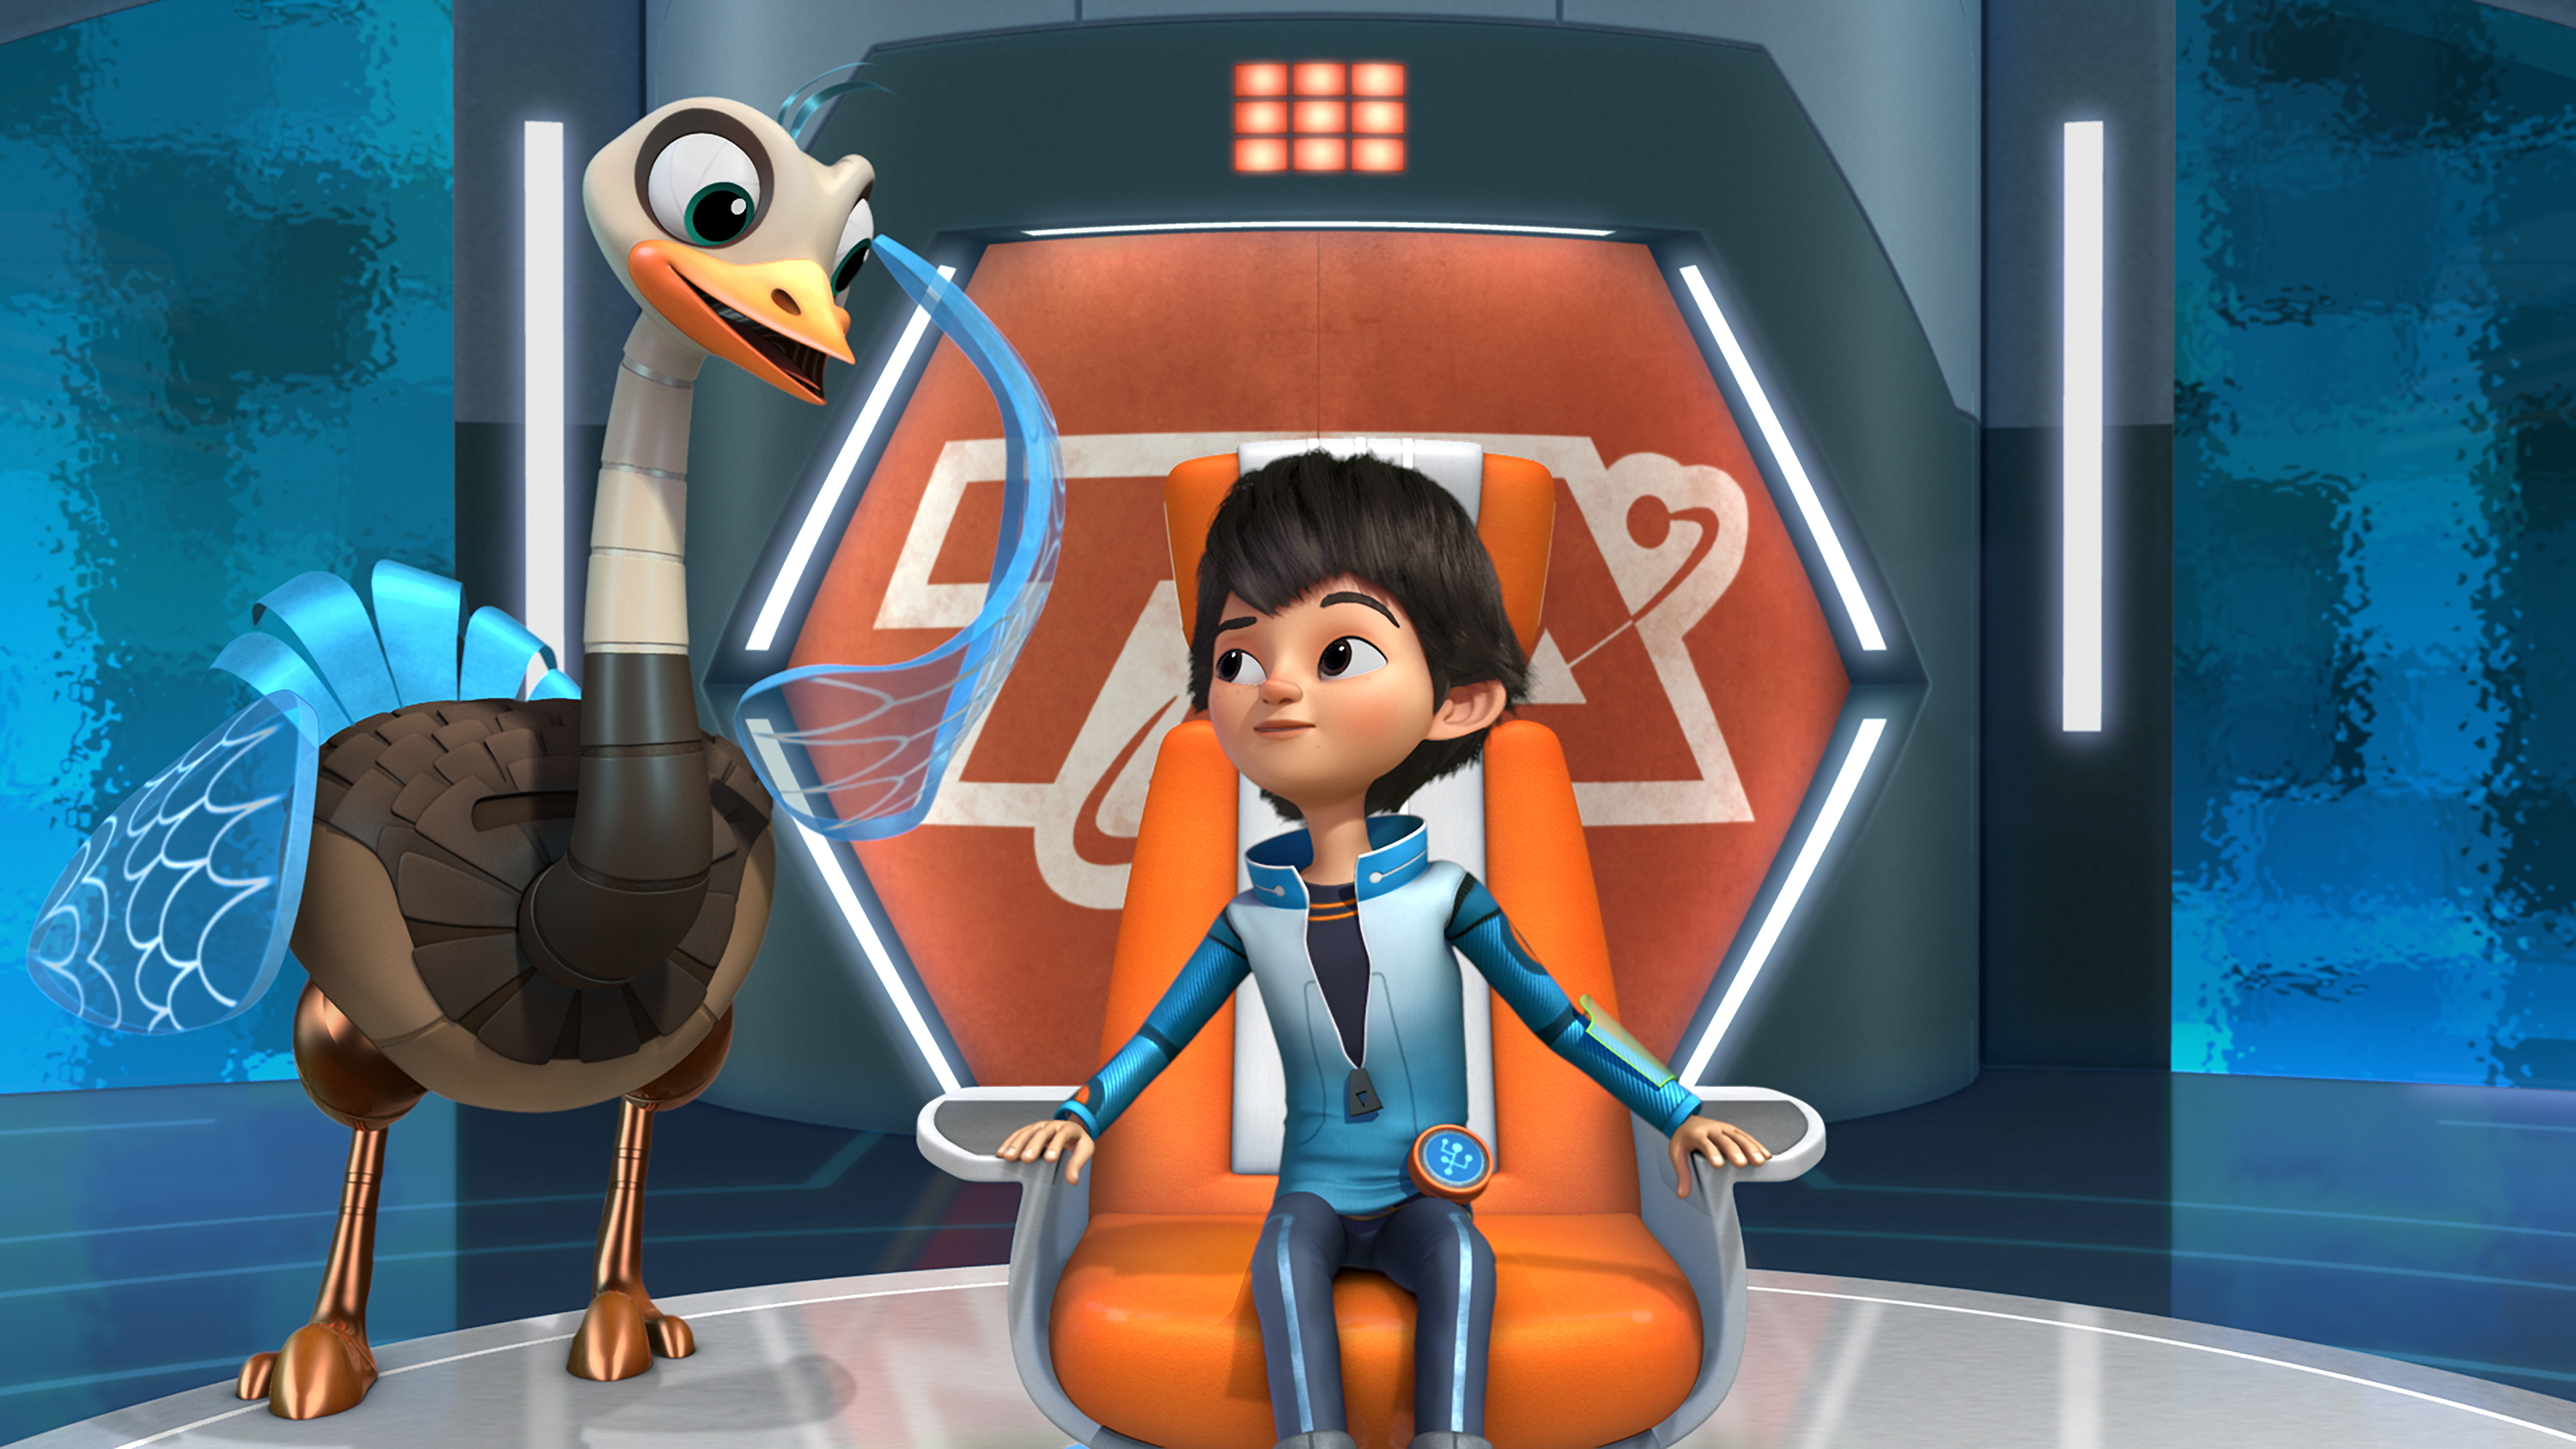 Characters from miles from tomorrowland